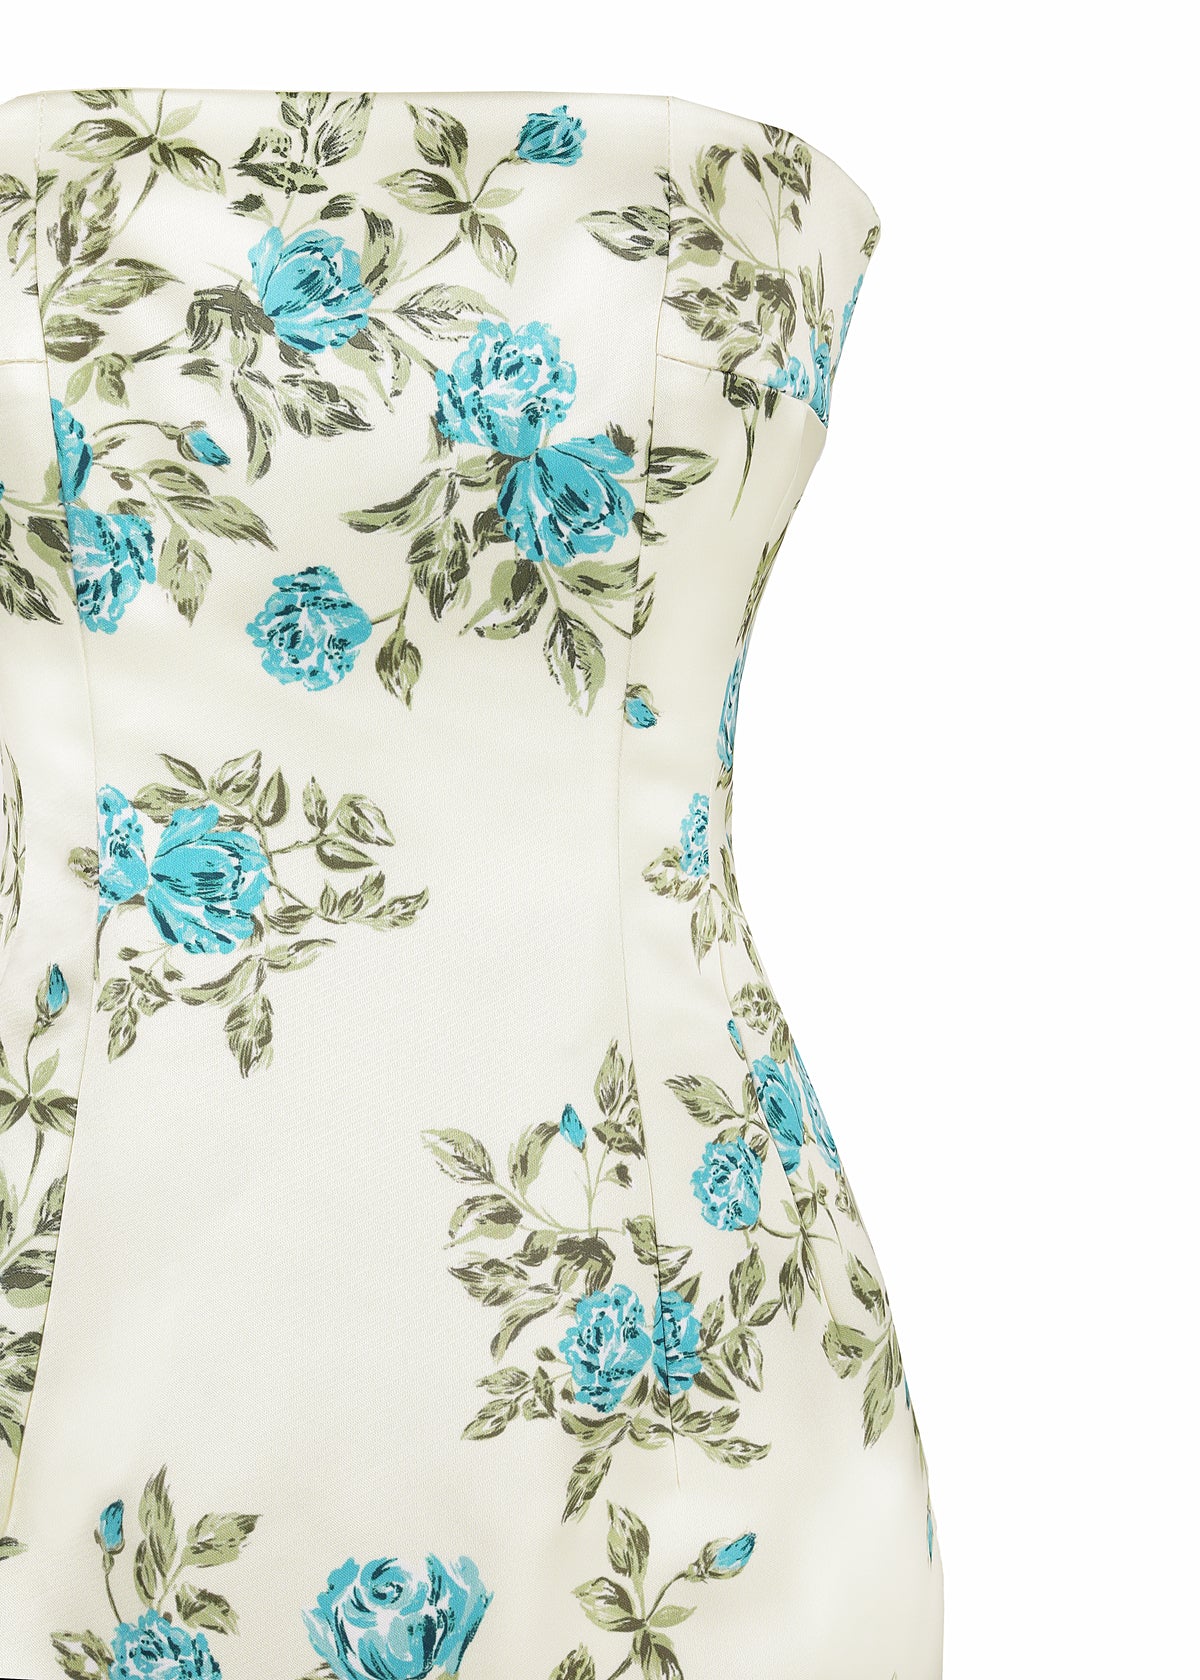 OTM Exclusive: Leila Floral Dress in Blue Turquoise